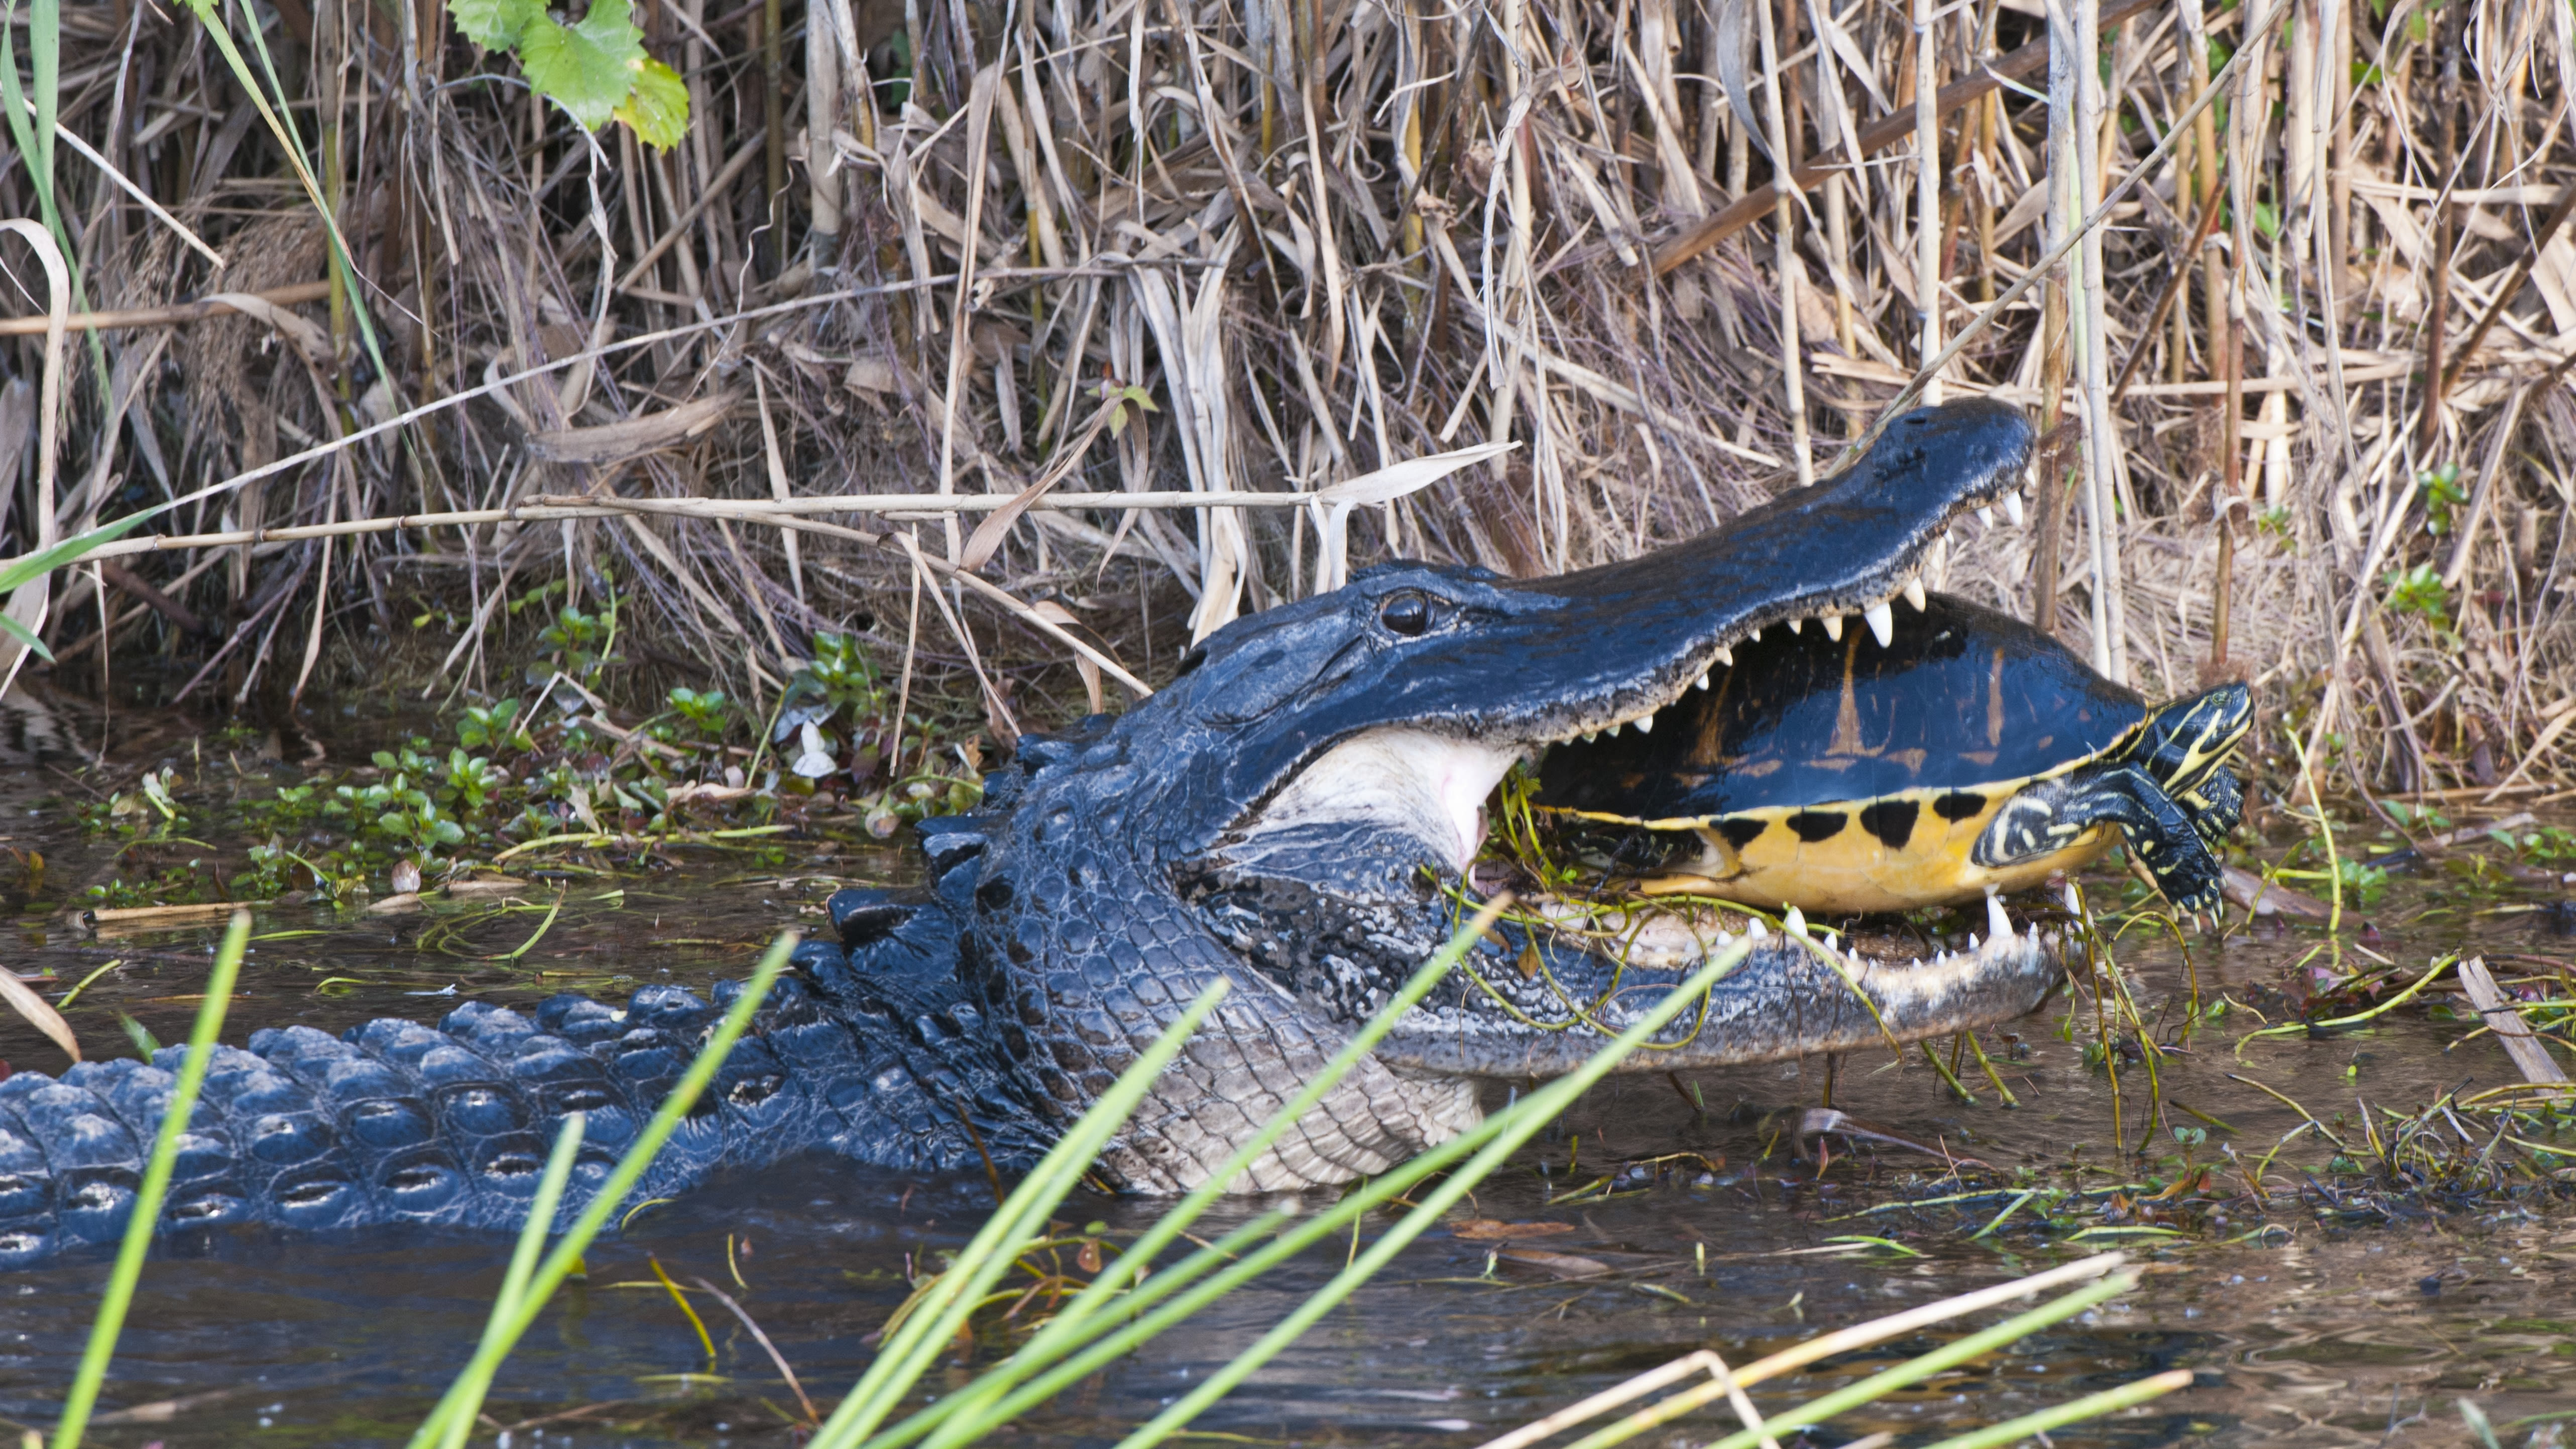 "To put your child in danger like that is unbelievable" – tourists interrupt alligator's meal to snap pictures in Florida Everglades